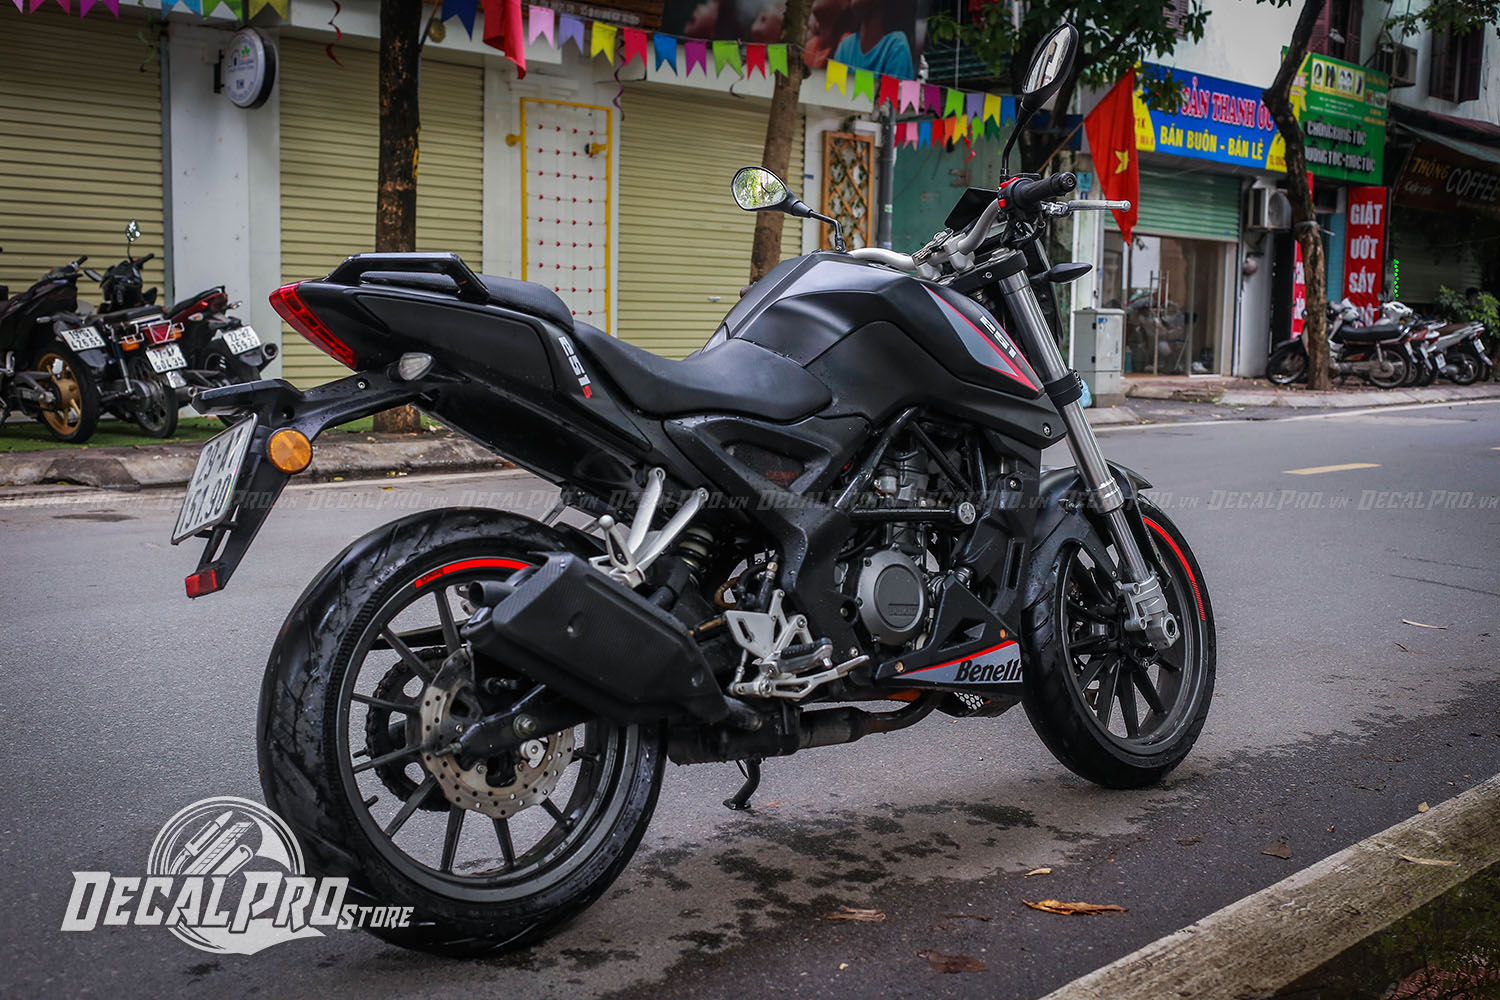 2022 Benelli TRK 251 India  On Road Price  Mileage  Features  Specs   YouTube